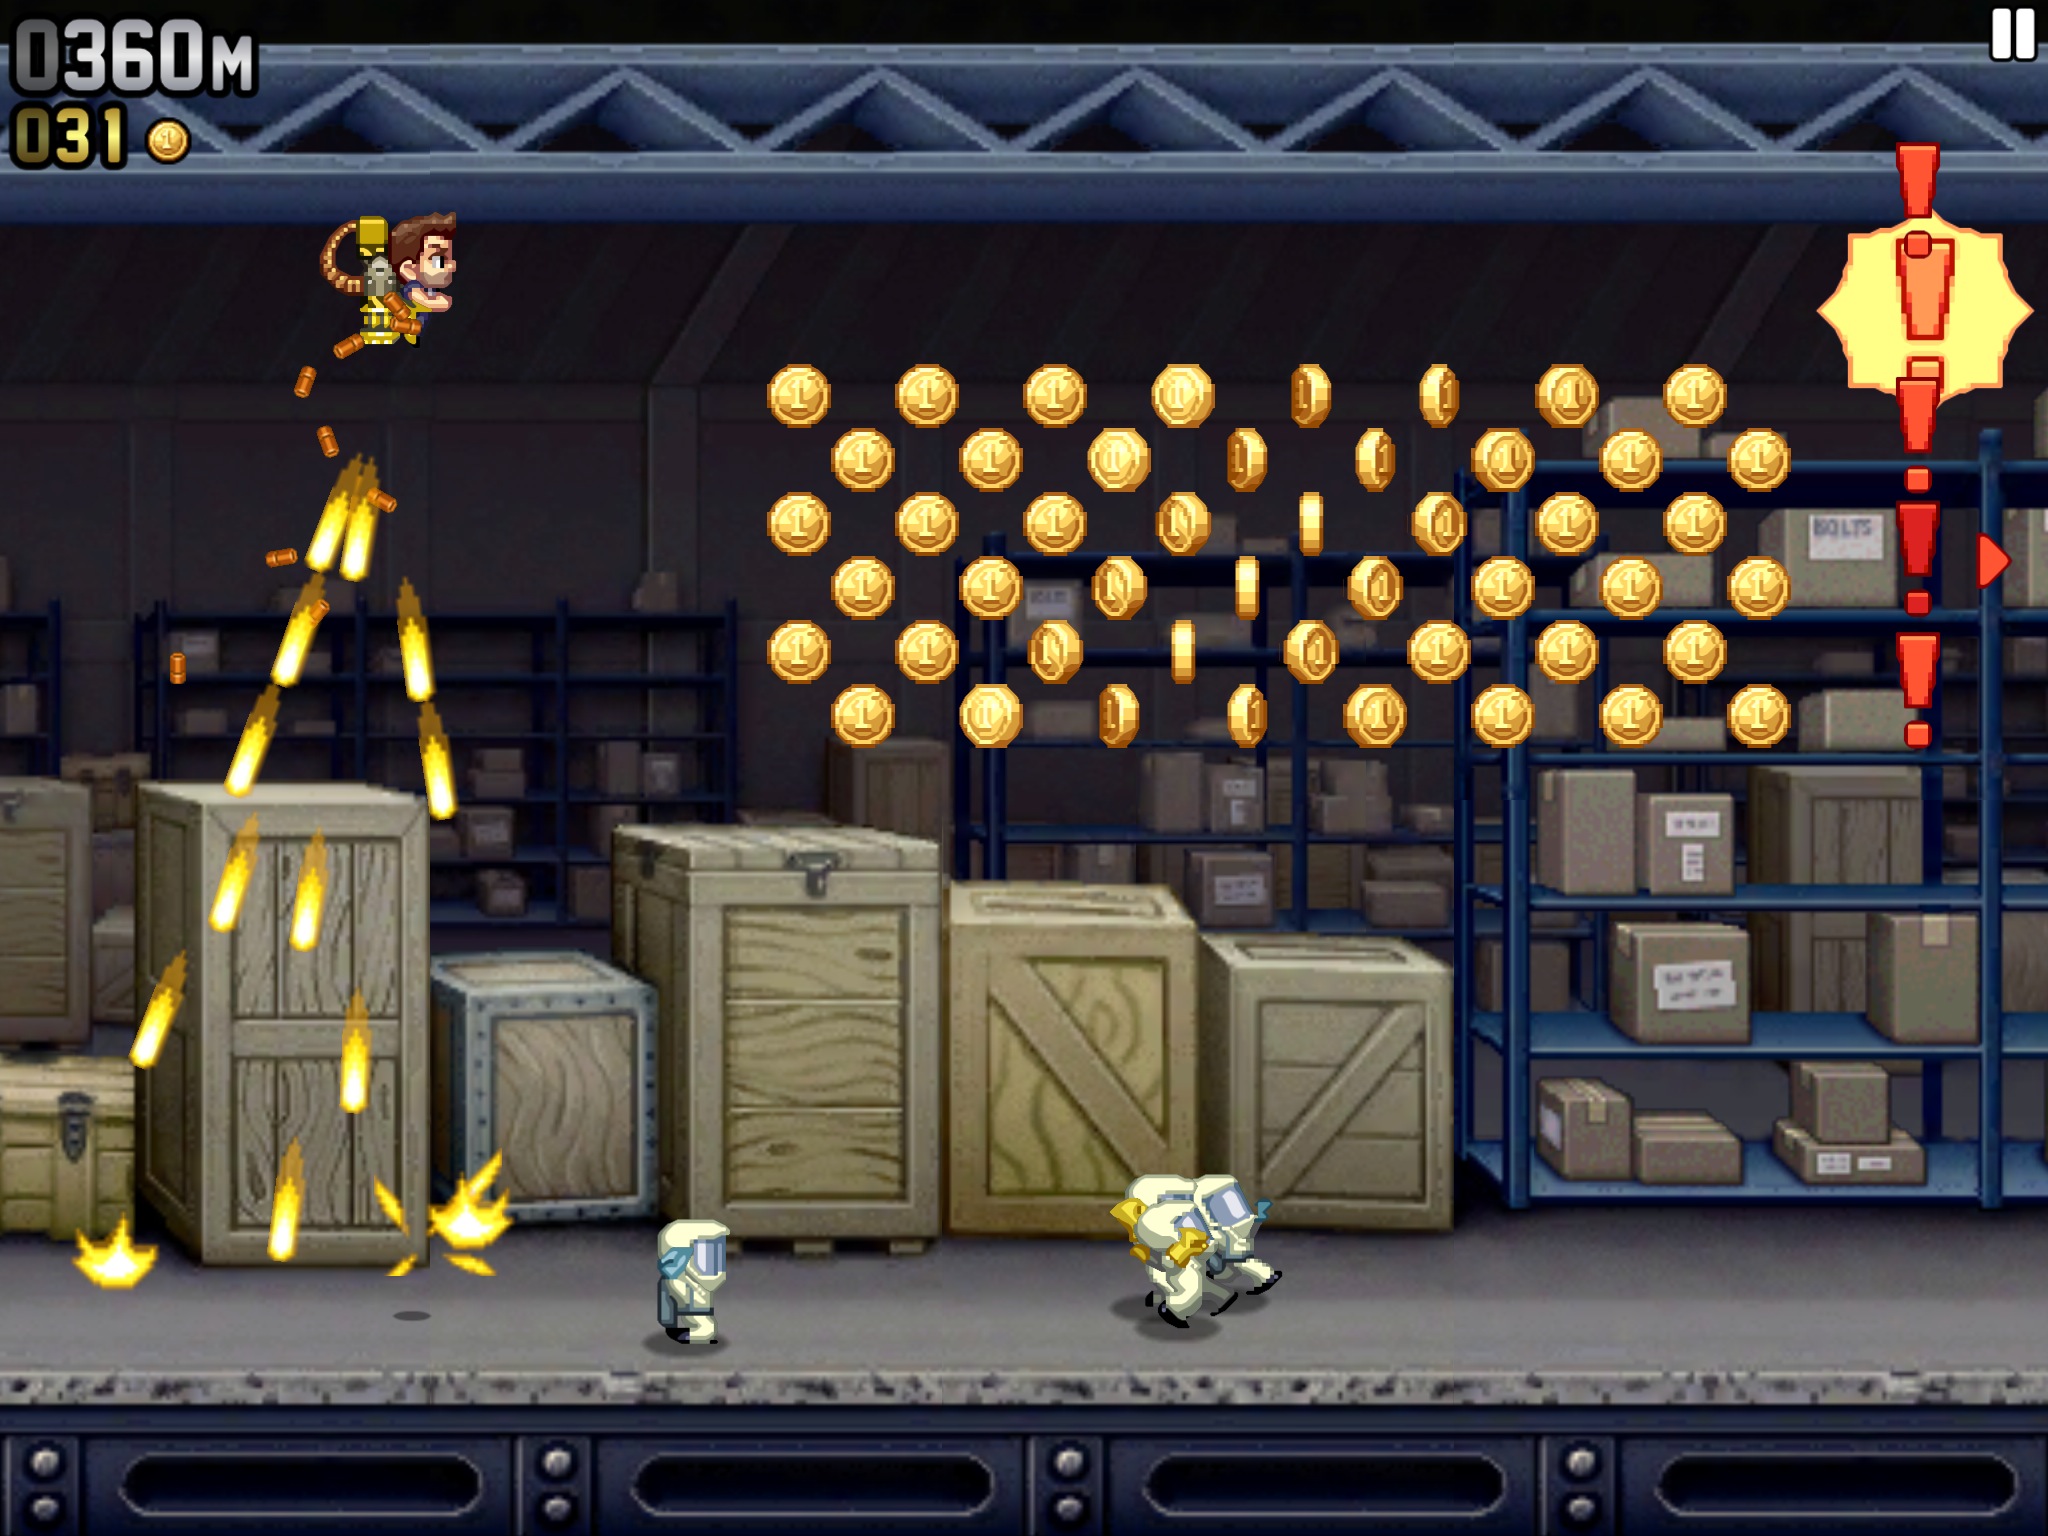 Jetpack Joyride Gains New Features and Retina Display Support